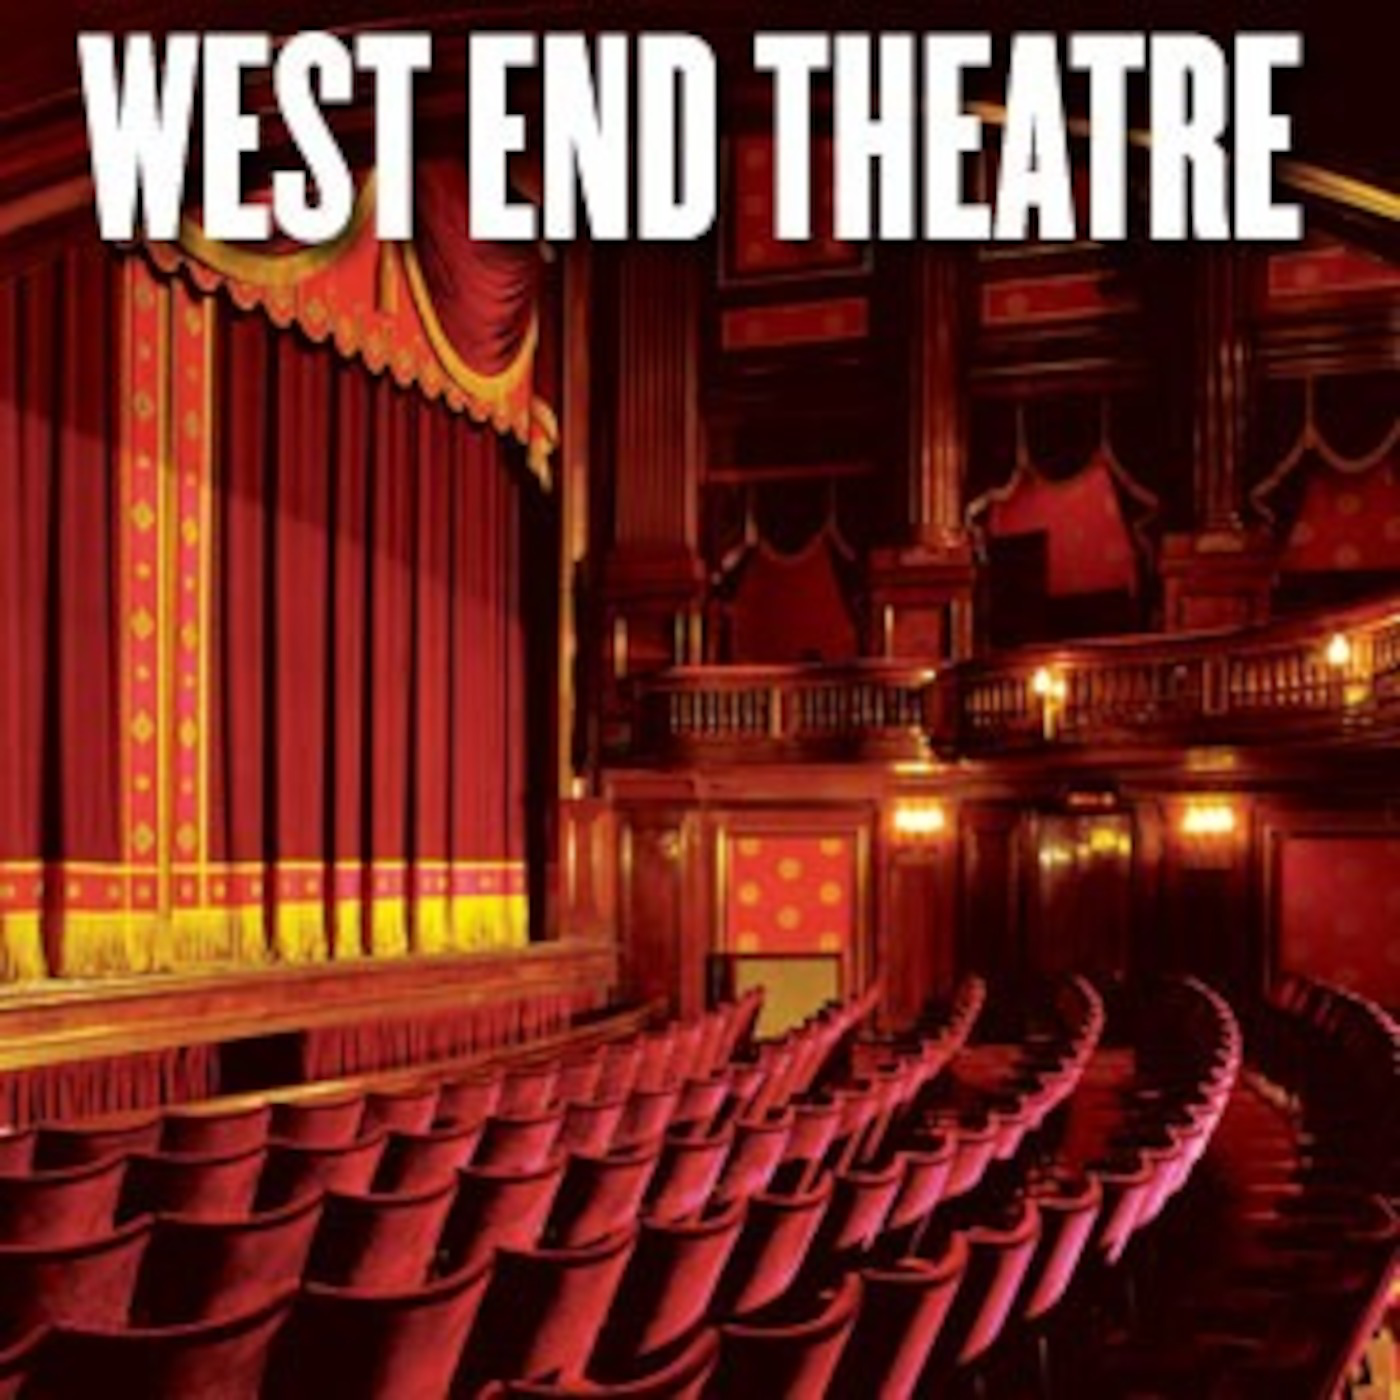 Cheap theatre seats for the young to stop West End stagnating